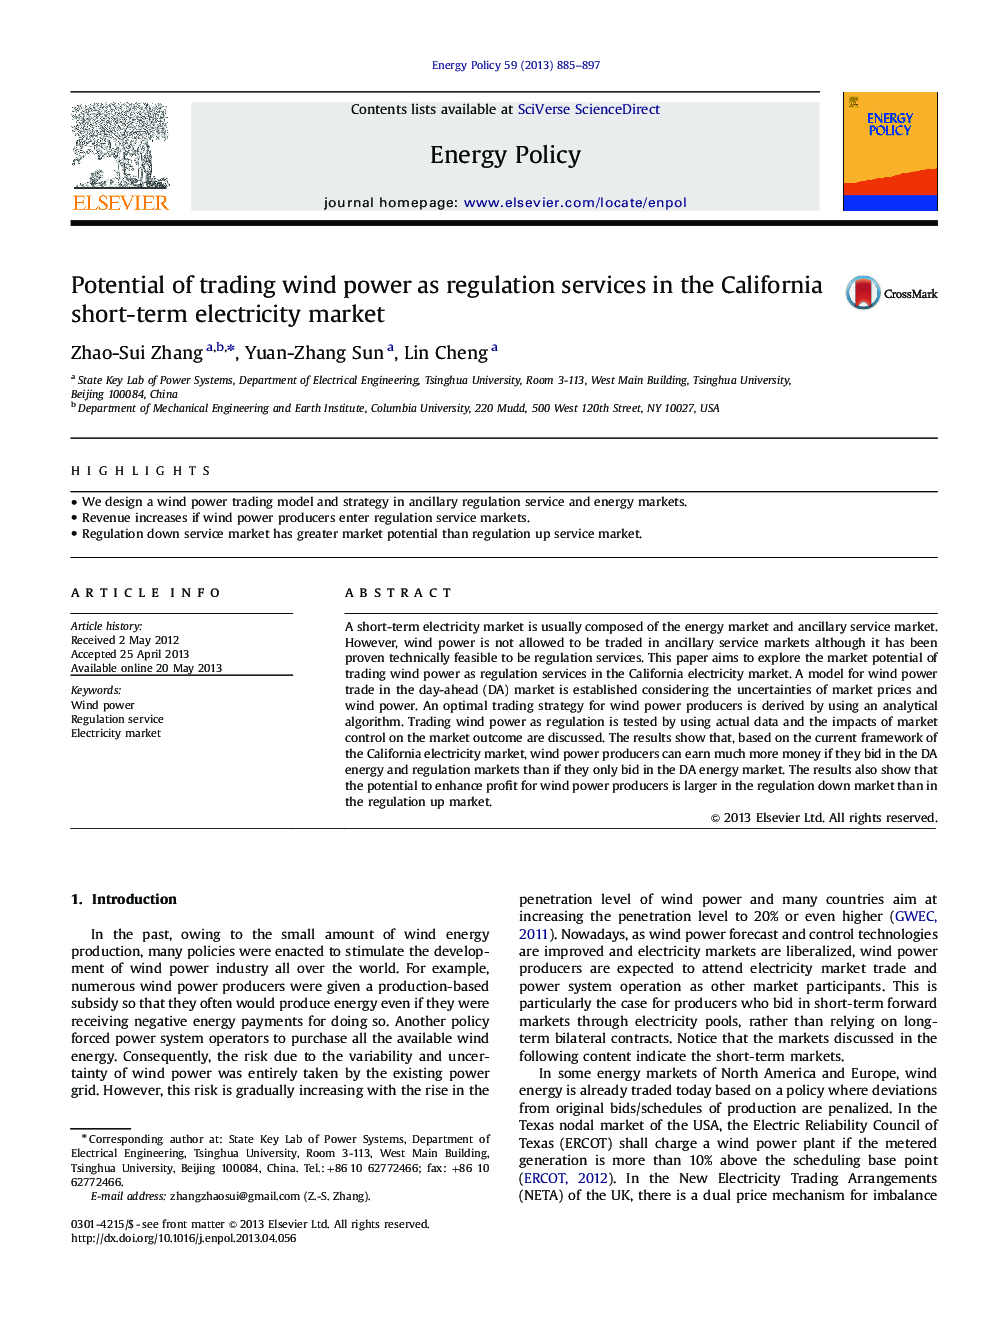 Potential of trading wind power as regulation services in the California short-term electricity market